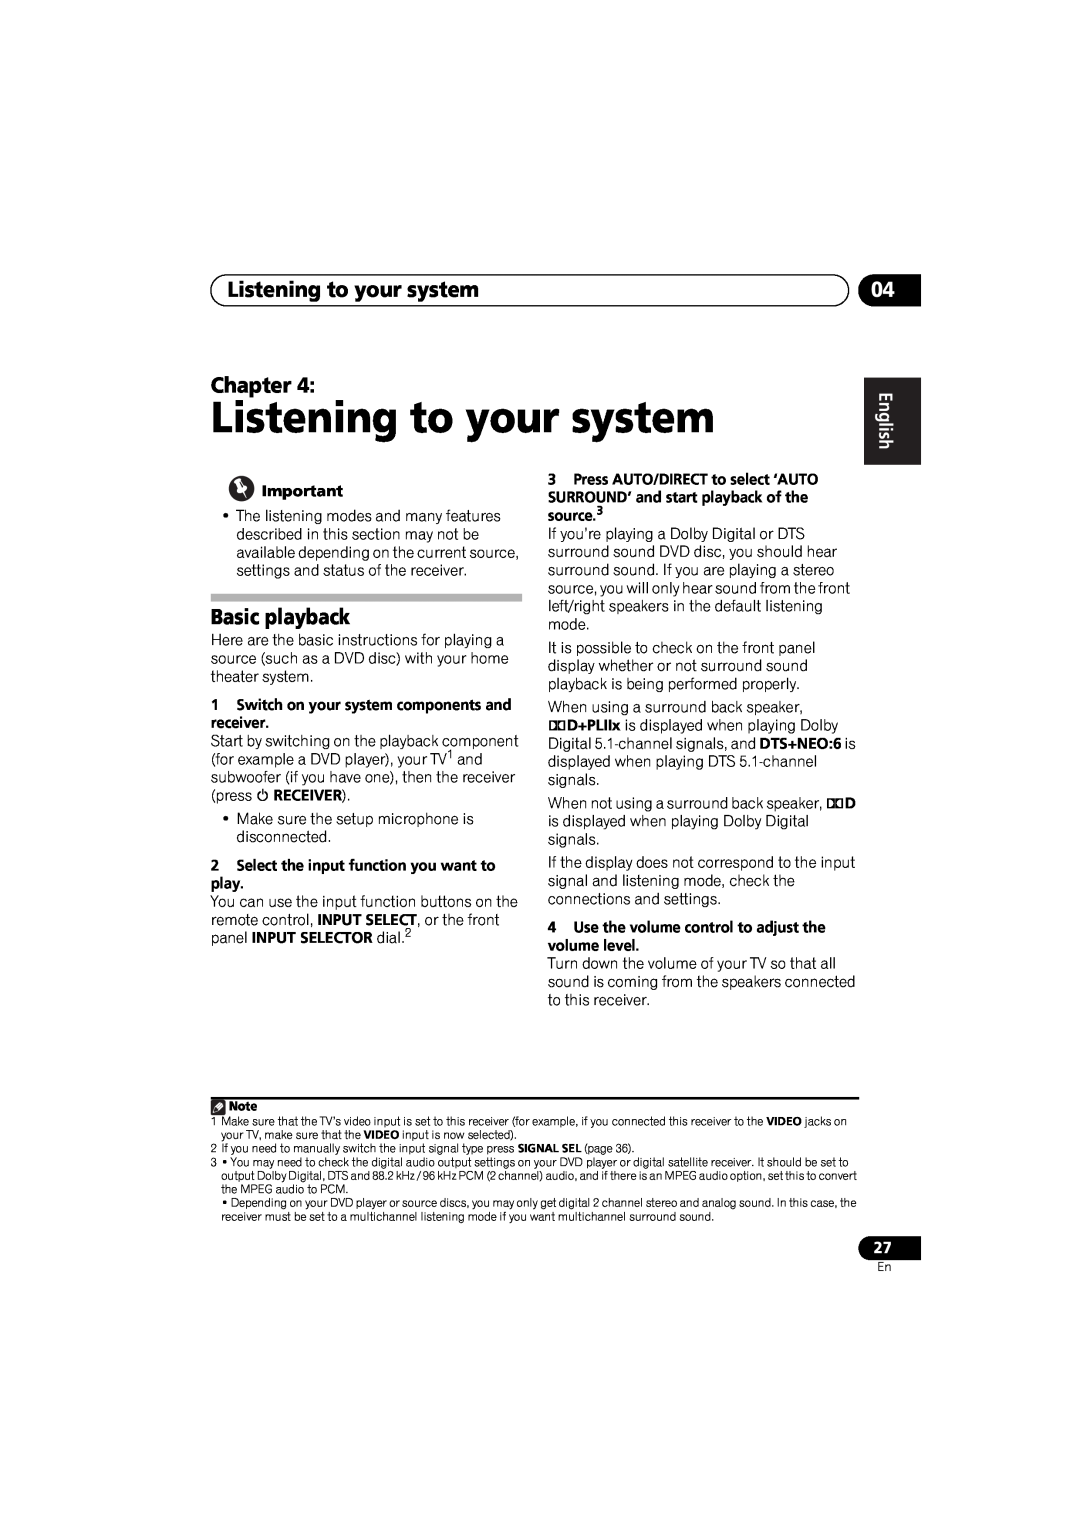 Pioneer VSX-520 manual Listening to your system Chapter, Basic playback, English, Français Español 